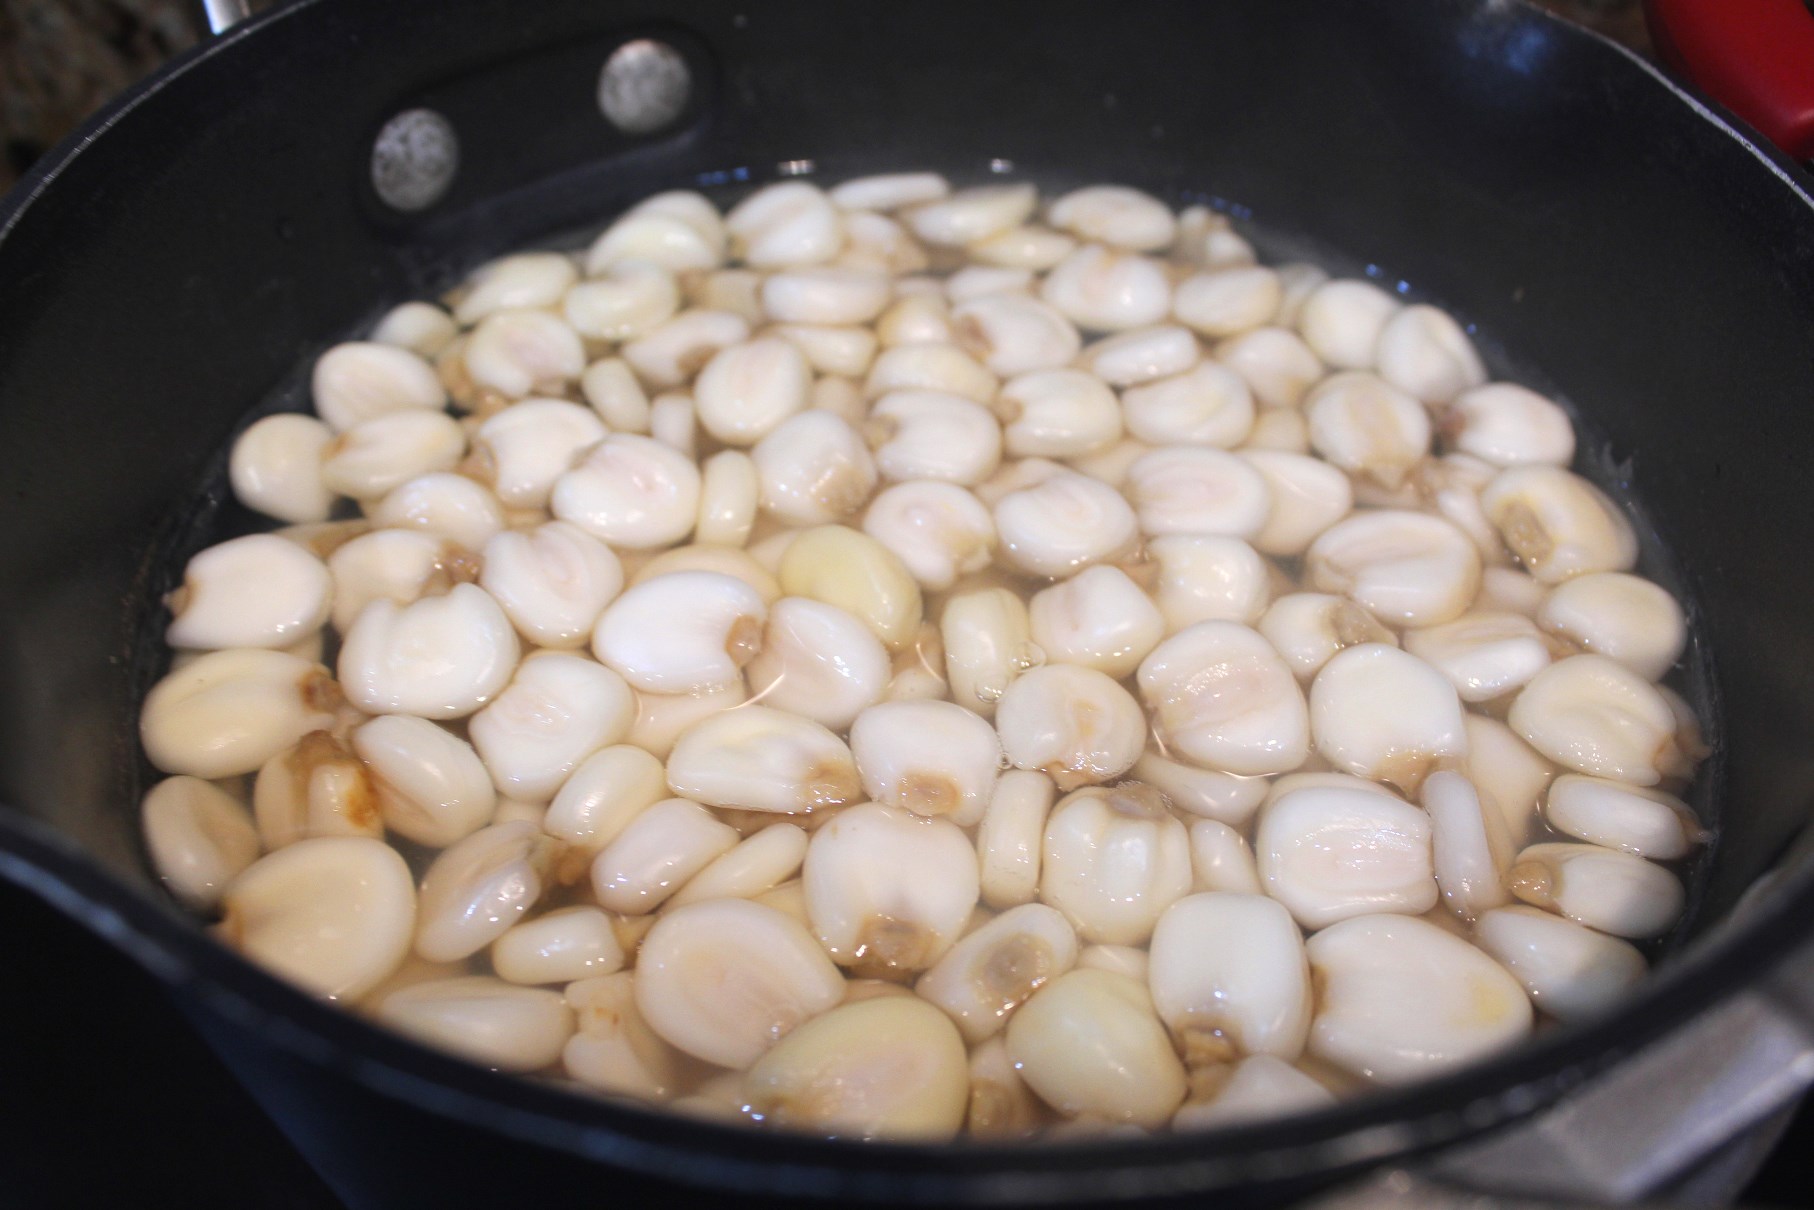 A pot of water and mote grains, ready to cook